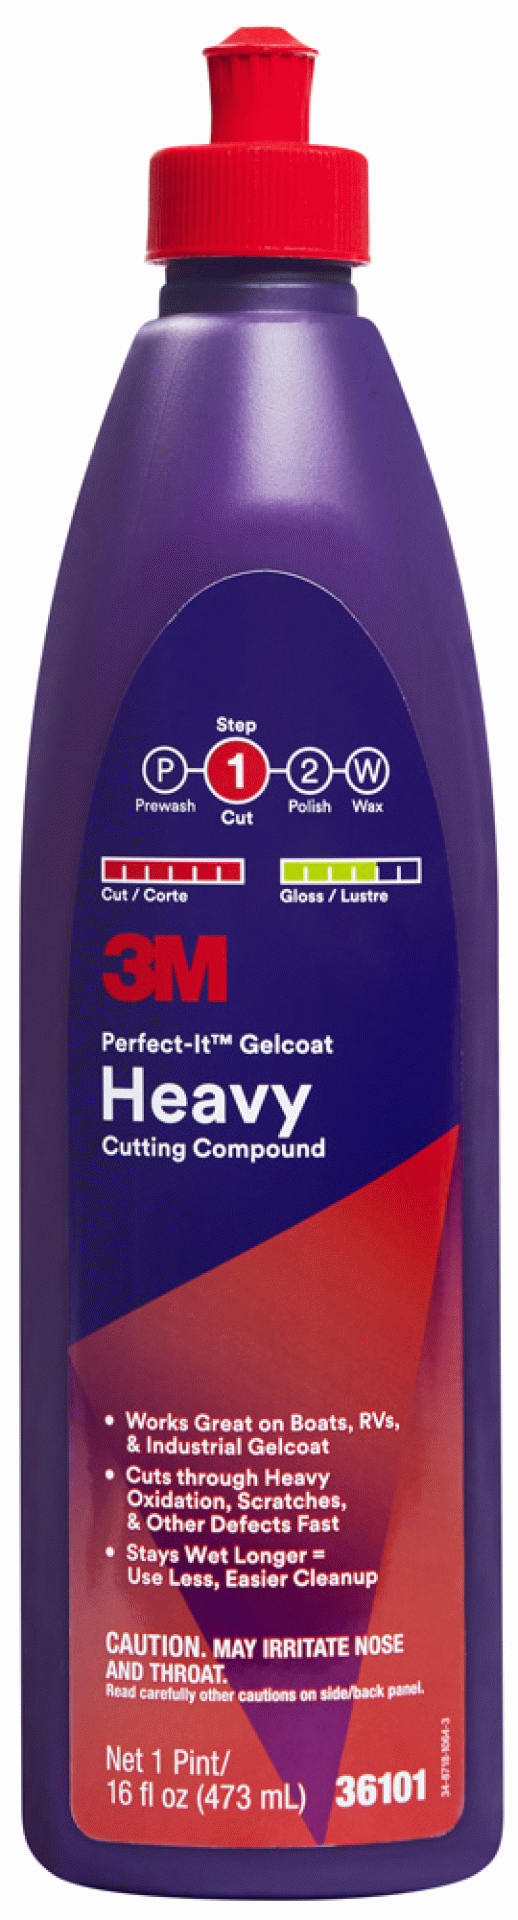 3M Company | 36101 | Perfect-It GelCoat Heavy Cutting Compound - 16 Oz.